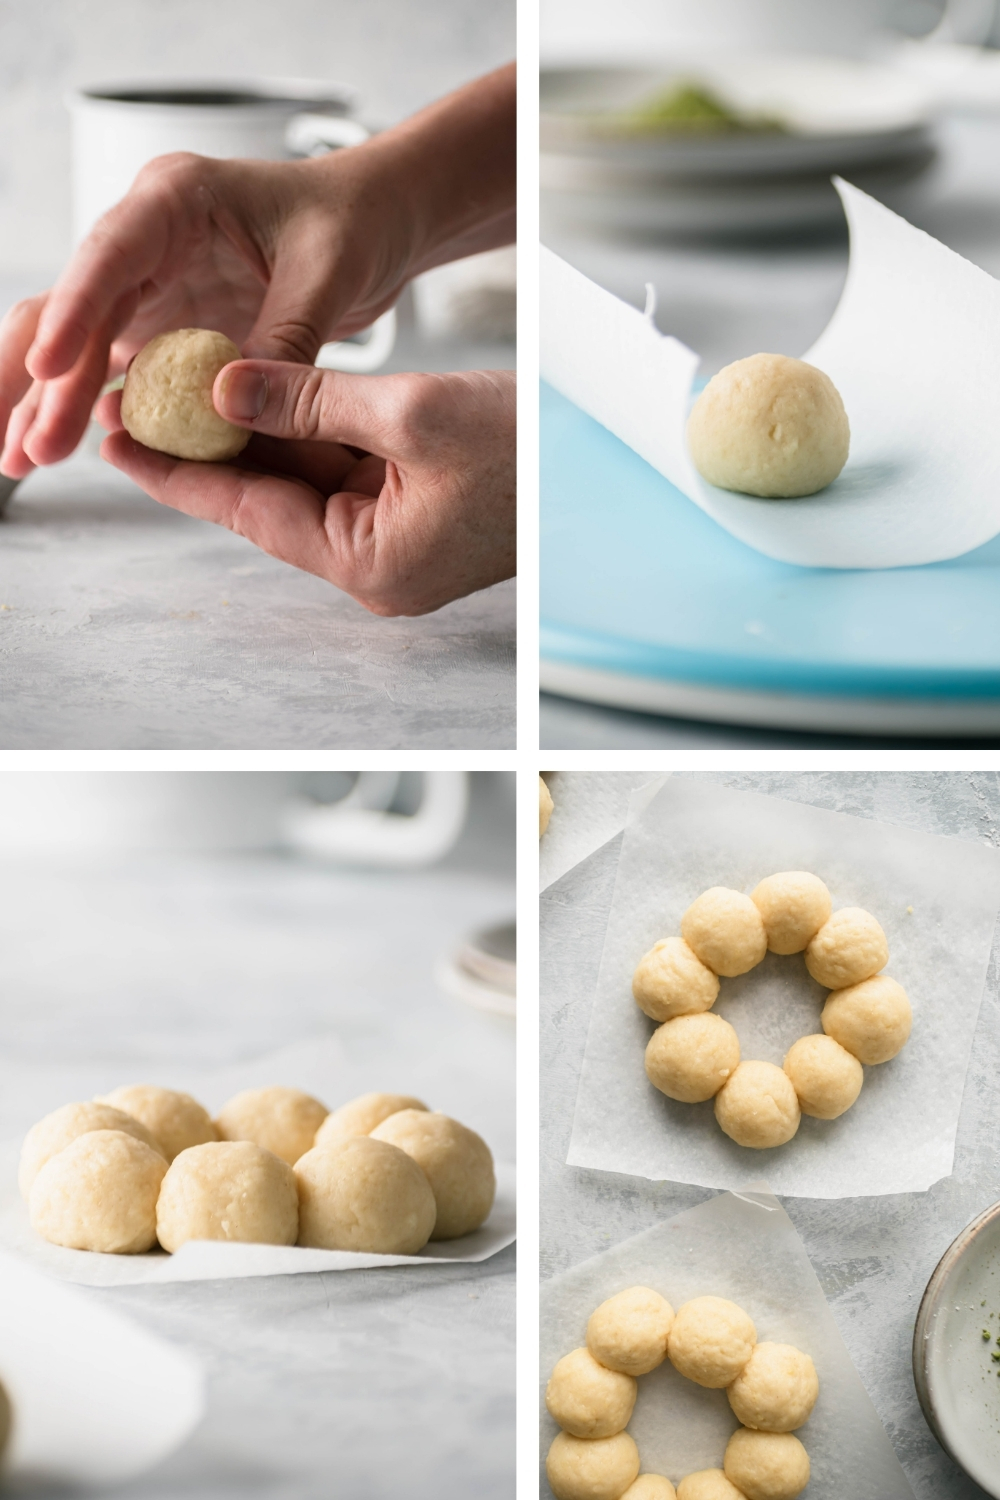 A four way picture showing the process of rolling the dough balls to make mochi donuts.